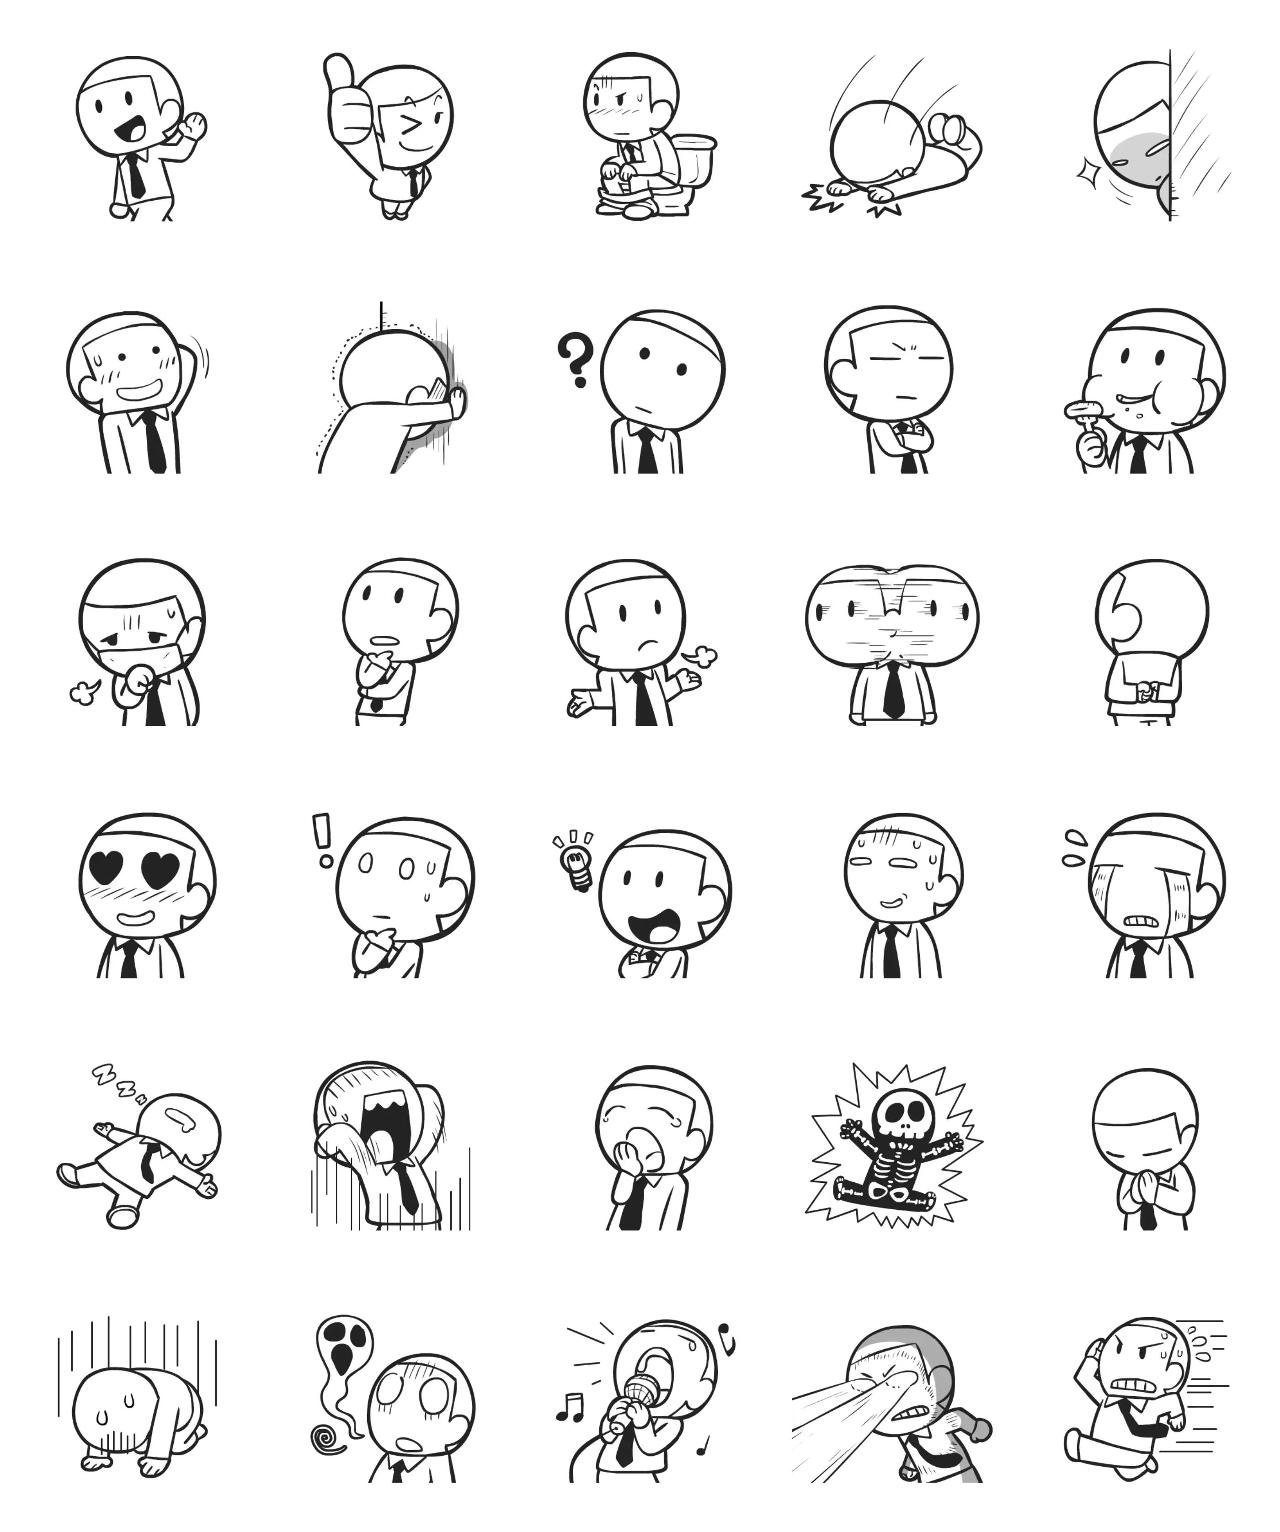 Dailylife of Mr. so & so Animation/Cartoon,Gag sticker pack for Whatsapp, Telegram, Signal, and others chatting and message apps